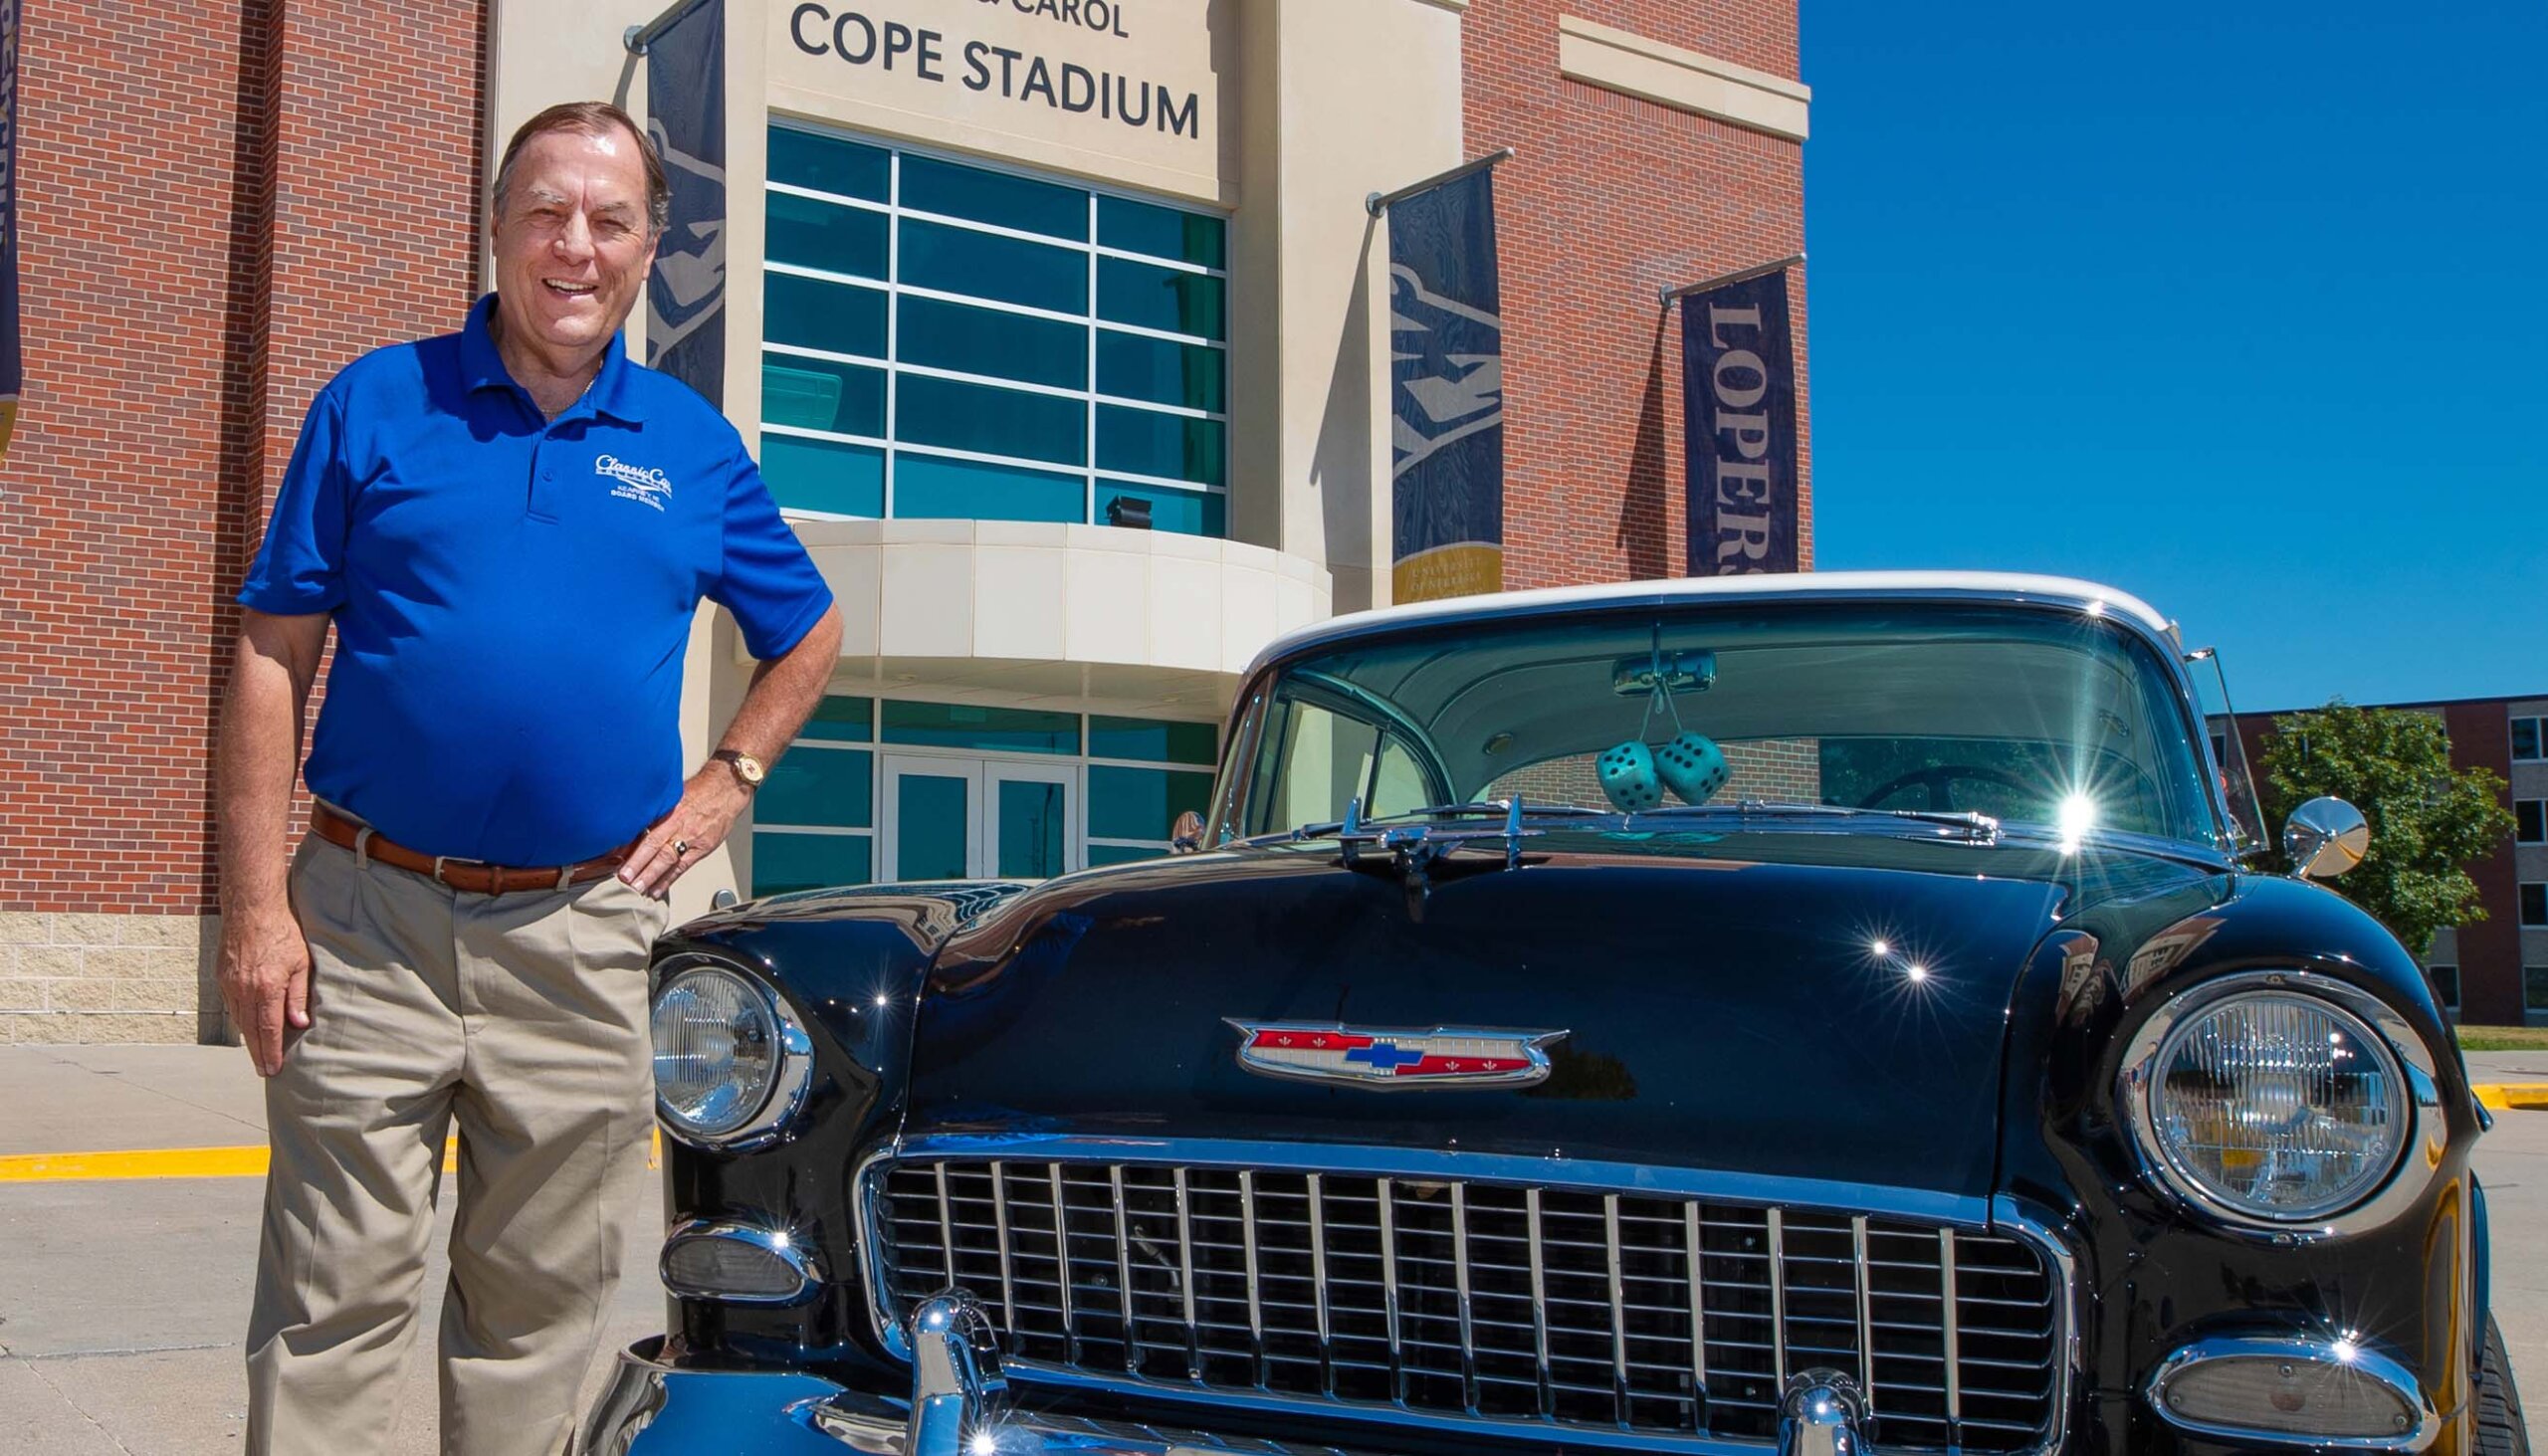 Brad Kernick loves classic cars and Loper football. He serves as chairman of the annual Cruise Nite celebration in Kearney and the Loper Football Backers event, which raises money for UNK student-athlete scholarships. (Photo by Corbey R. Dorsey, UNK Communications)